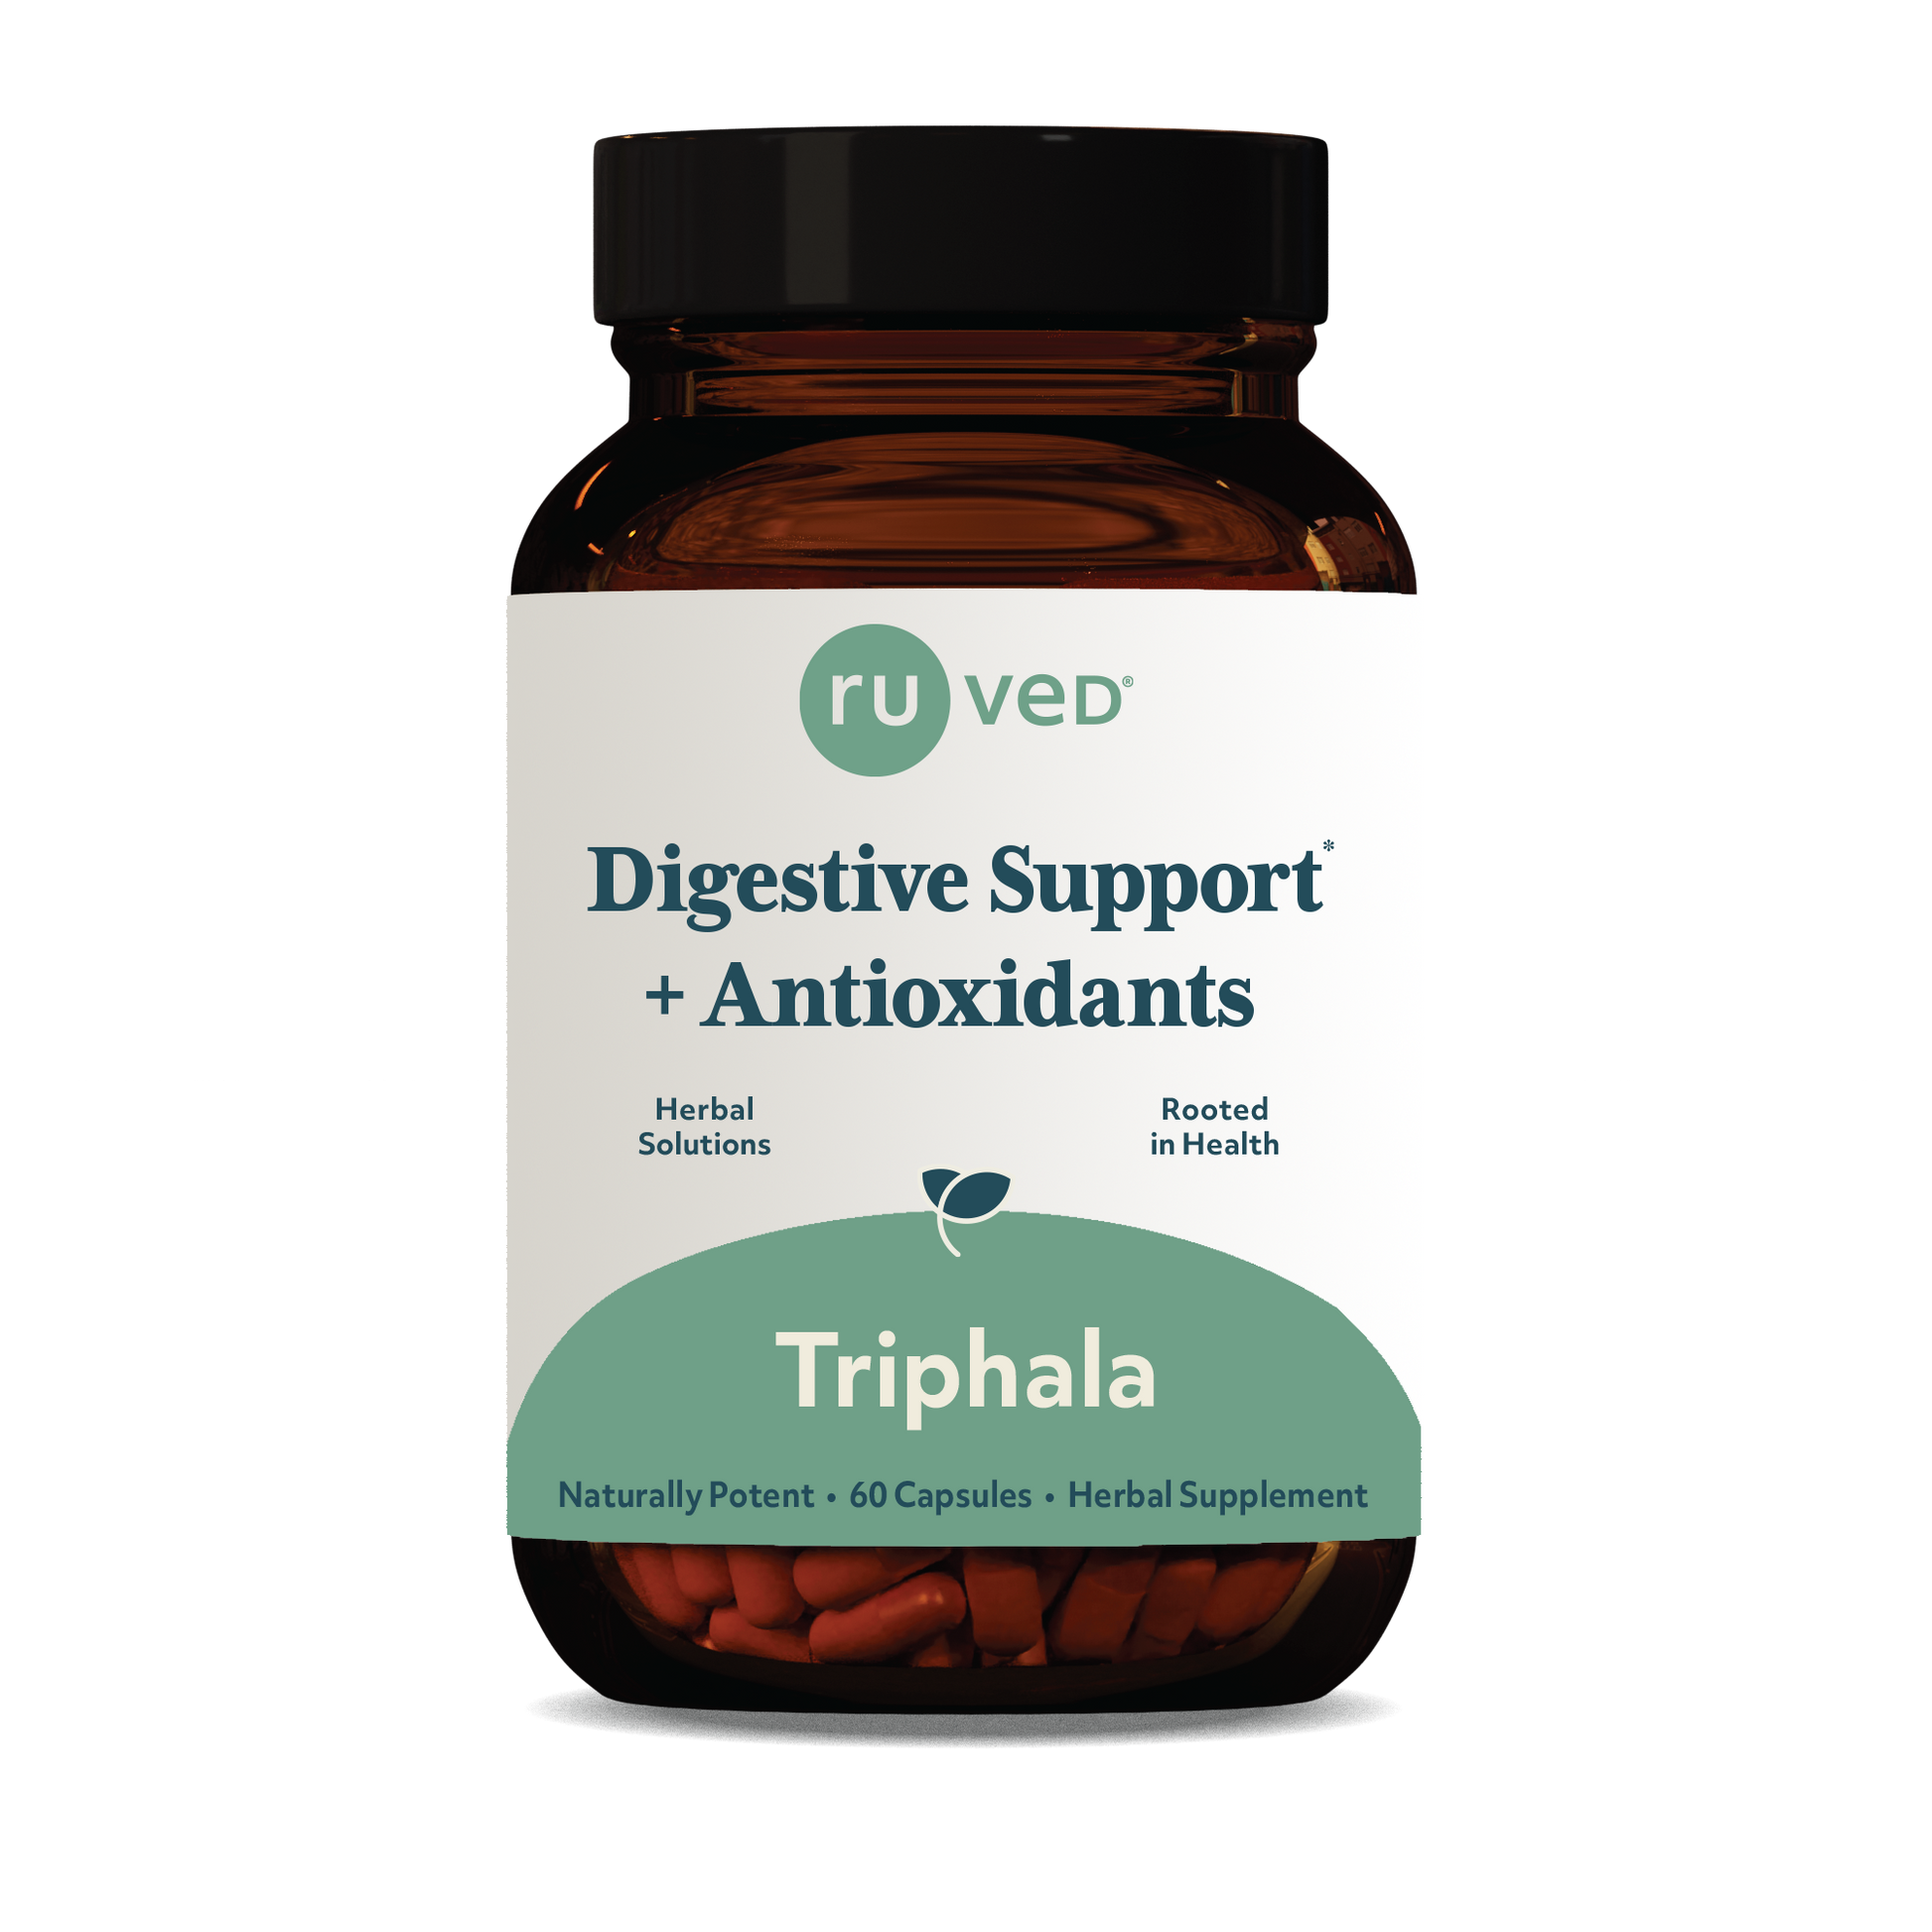 triphala Herbal Support for Calm and Balanced Digestion, Promotes Gut Health and Optimal Elimination by ruved herbal supplements and ayush herbs